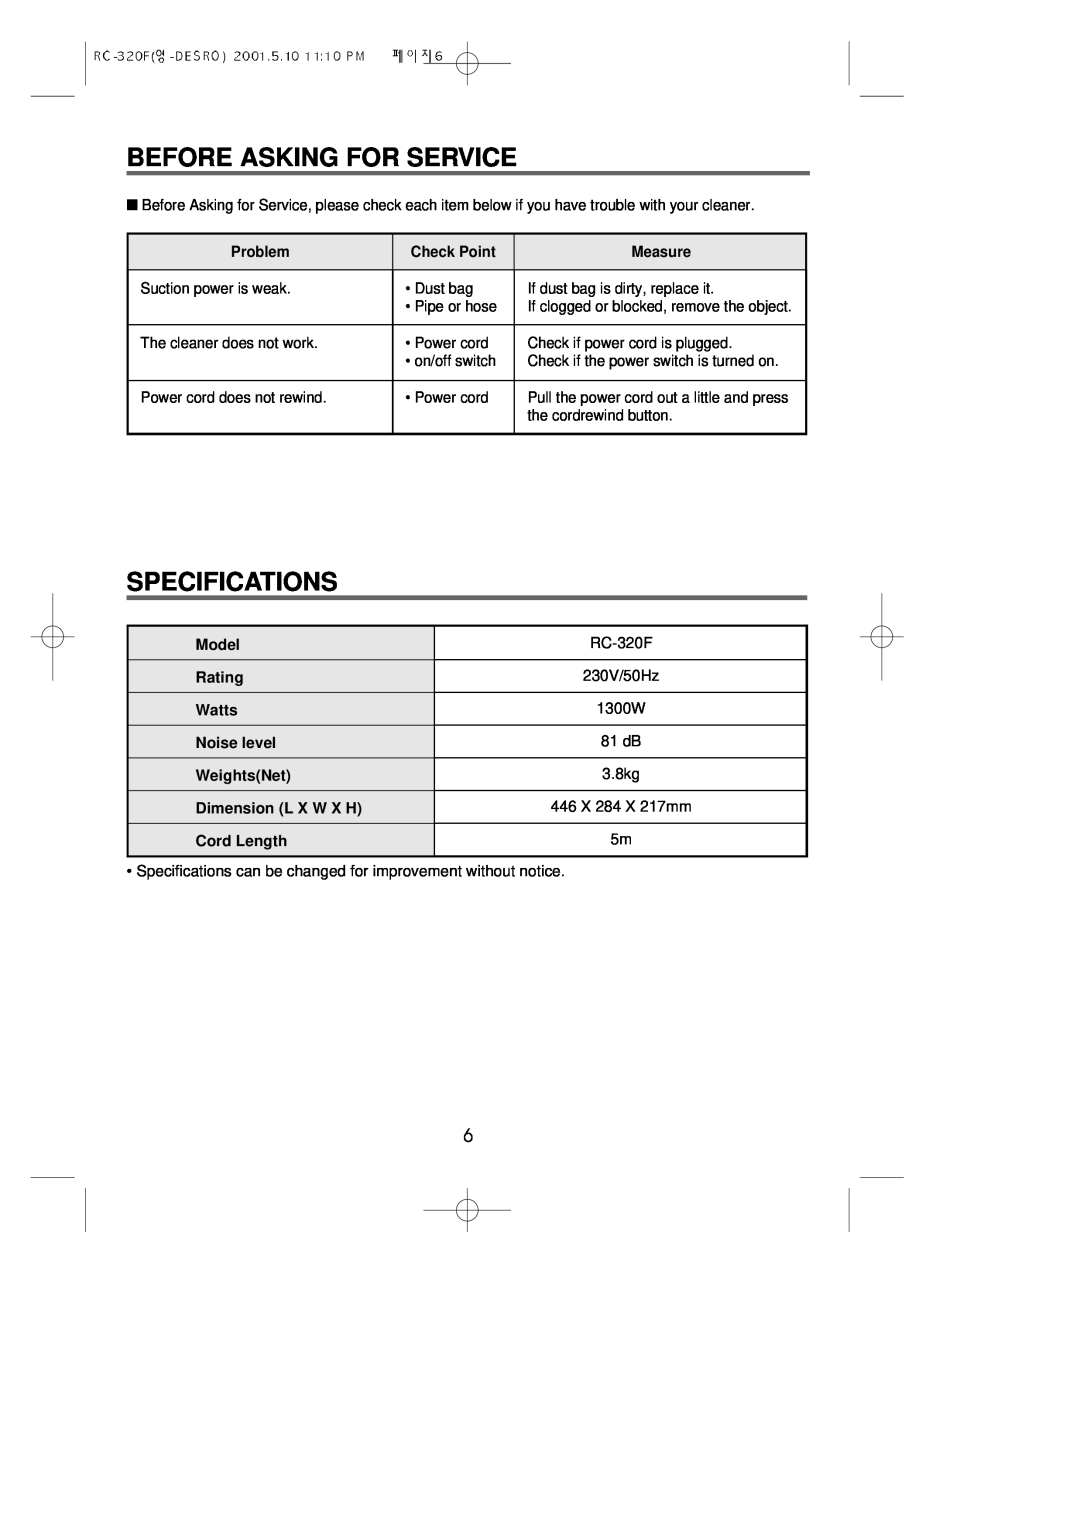 Daewoo RC-320F owner manual Before Asking For Service, Specifications 